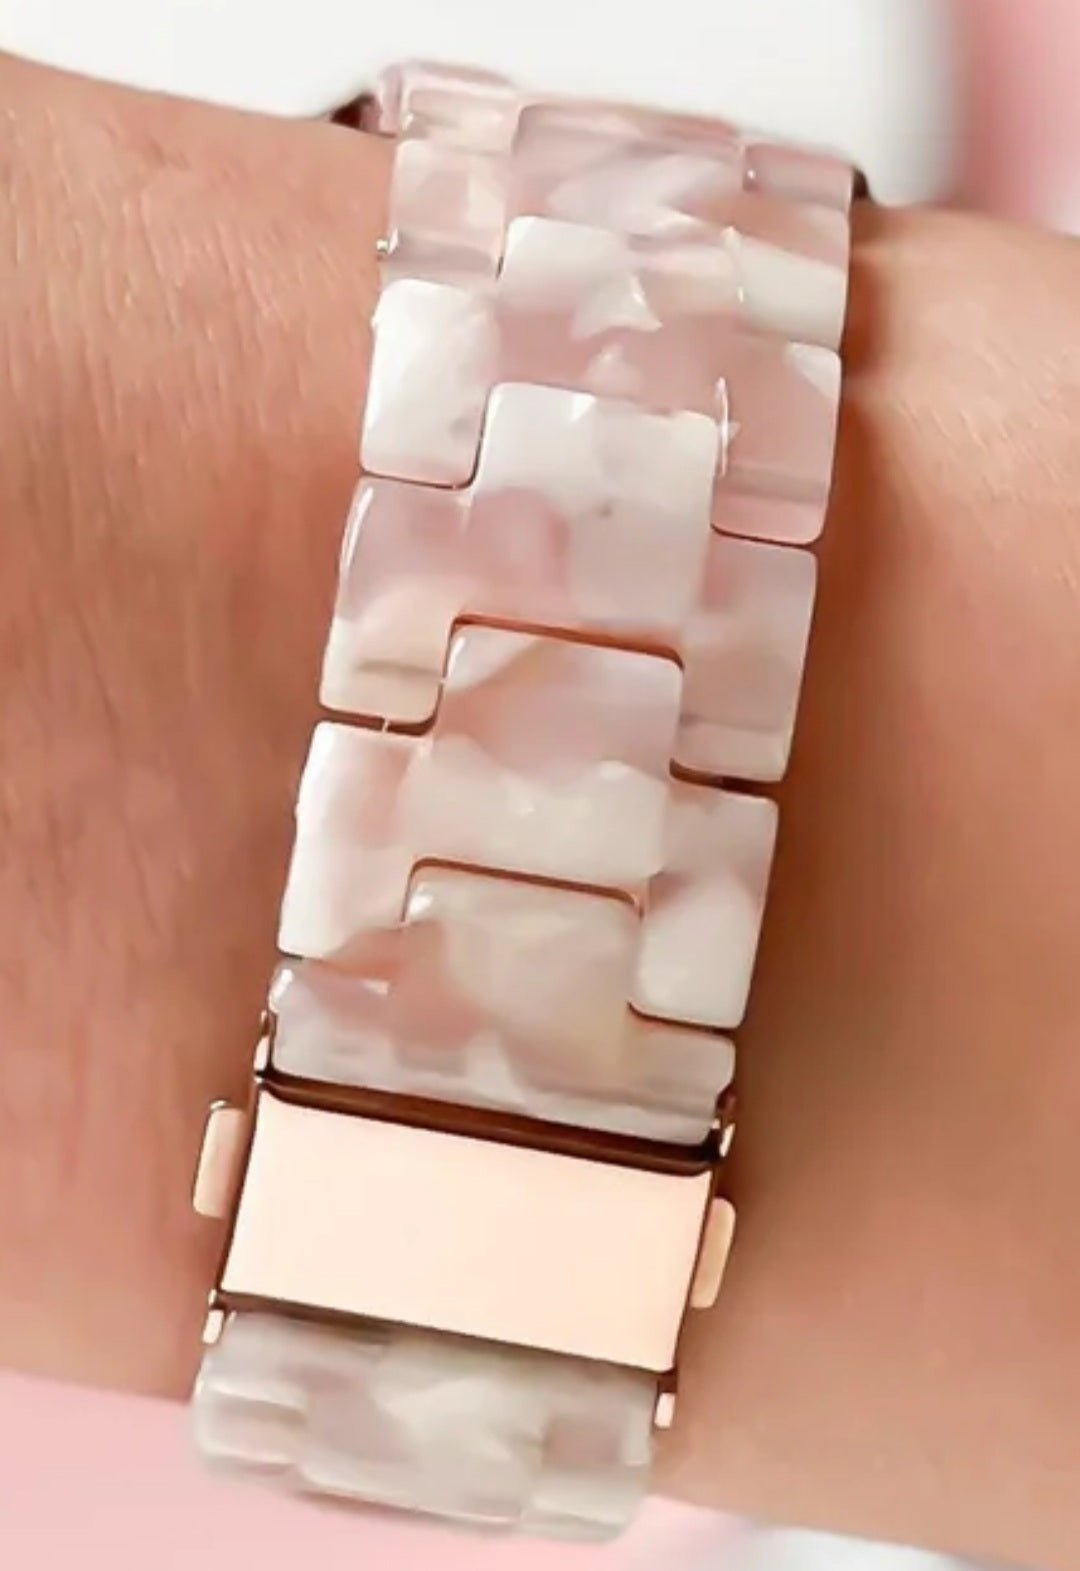 Coconut Lane-Luxury Apple Rose Resin Watch Strap FREE UK Delivery